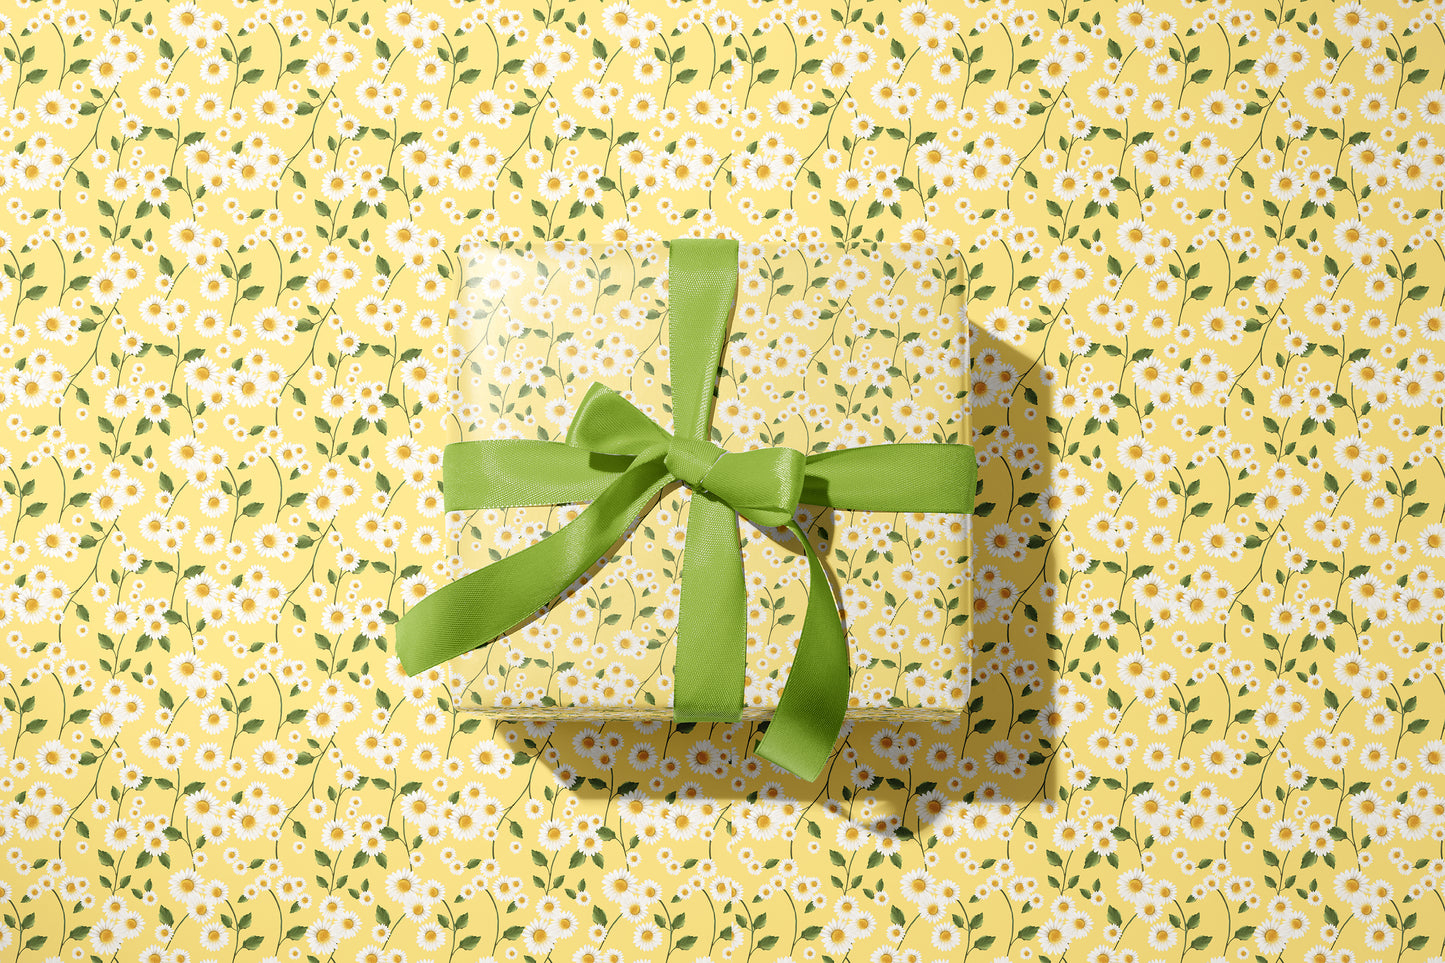 Daisy Flowers in Yellow Wrapping Paper- Studio Q - Art by Nicky Quartermaine Scott